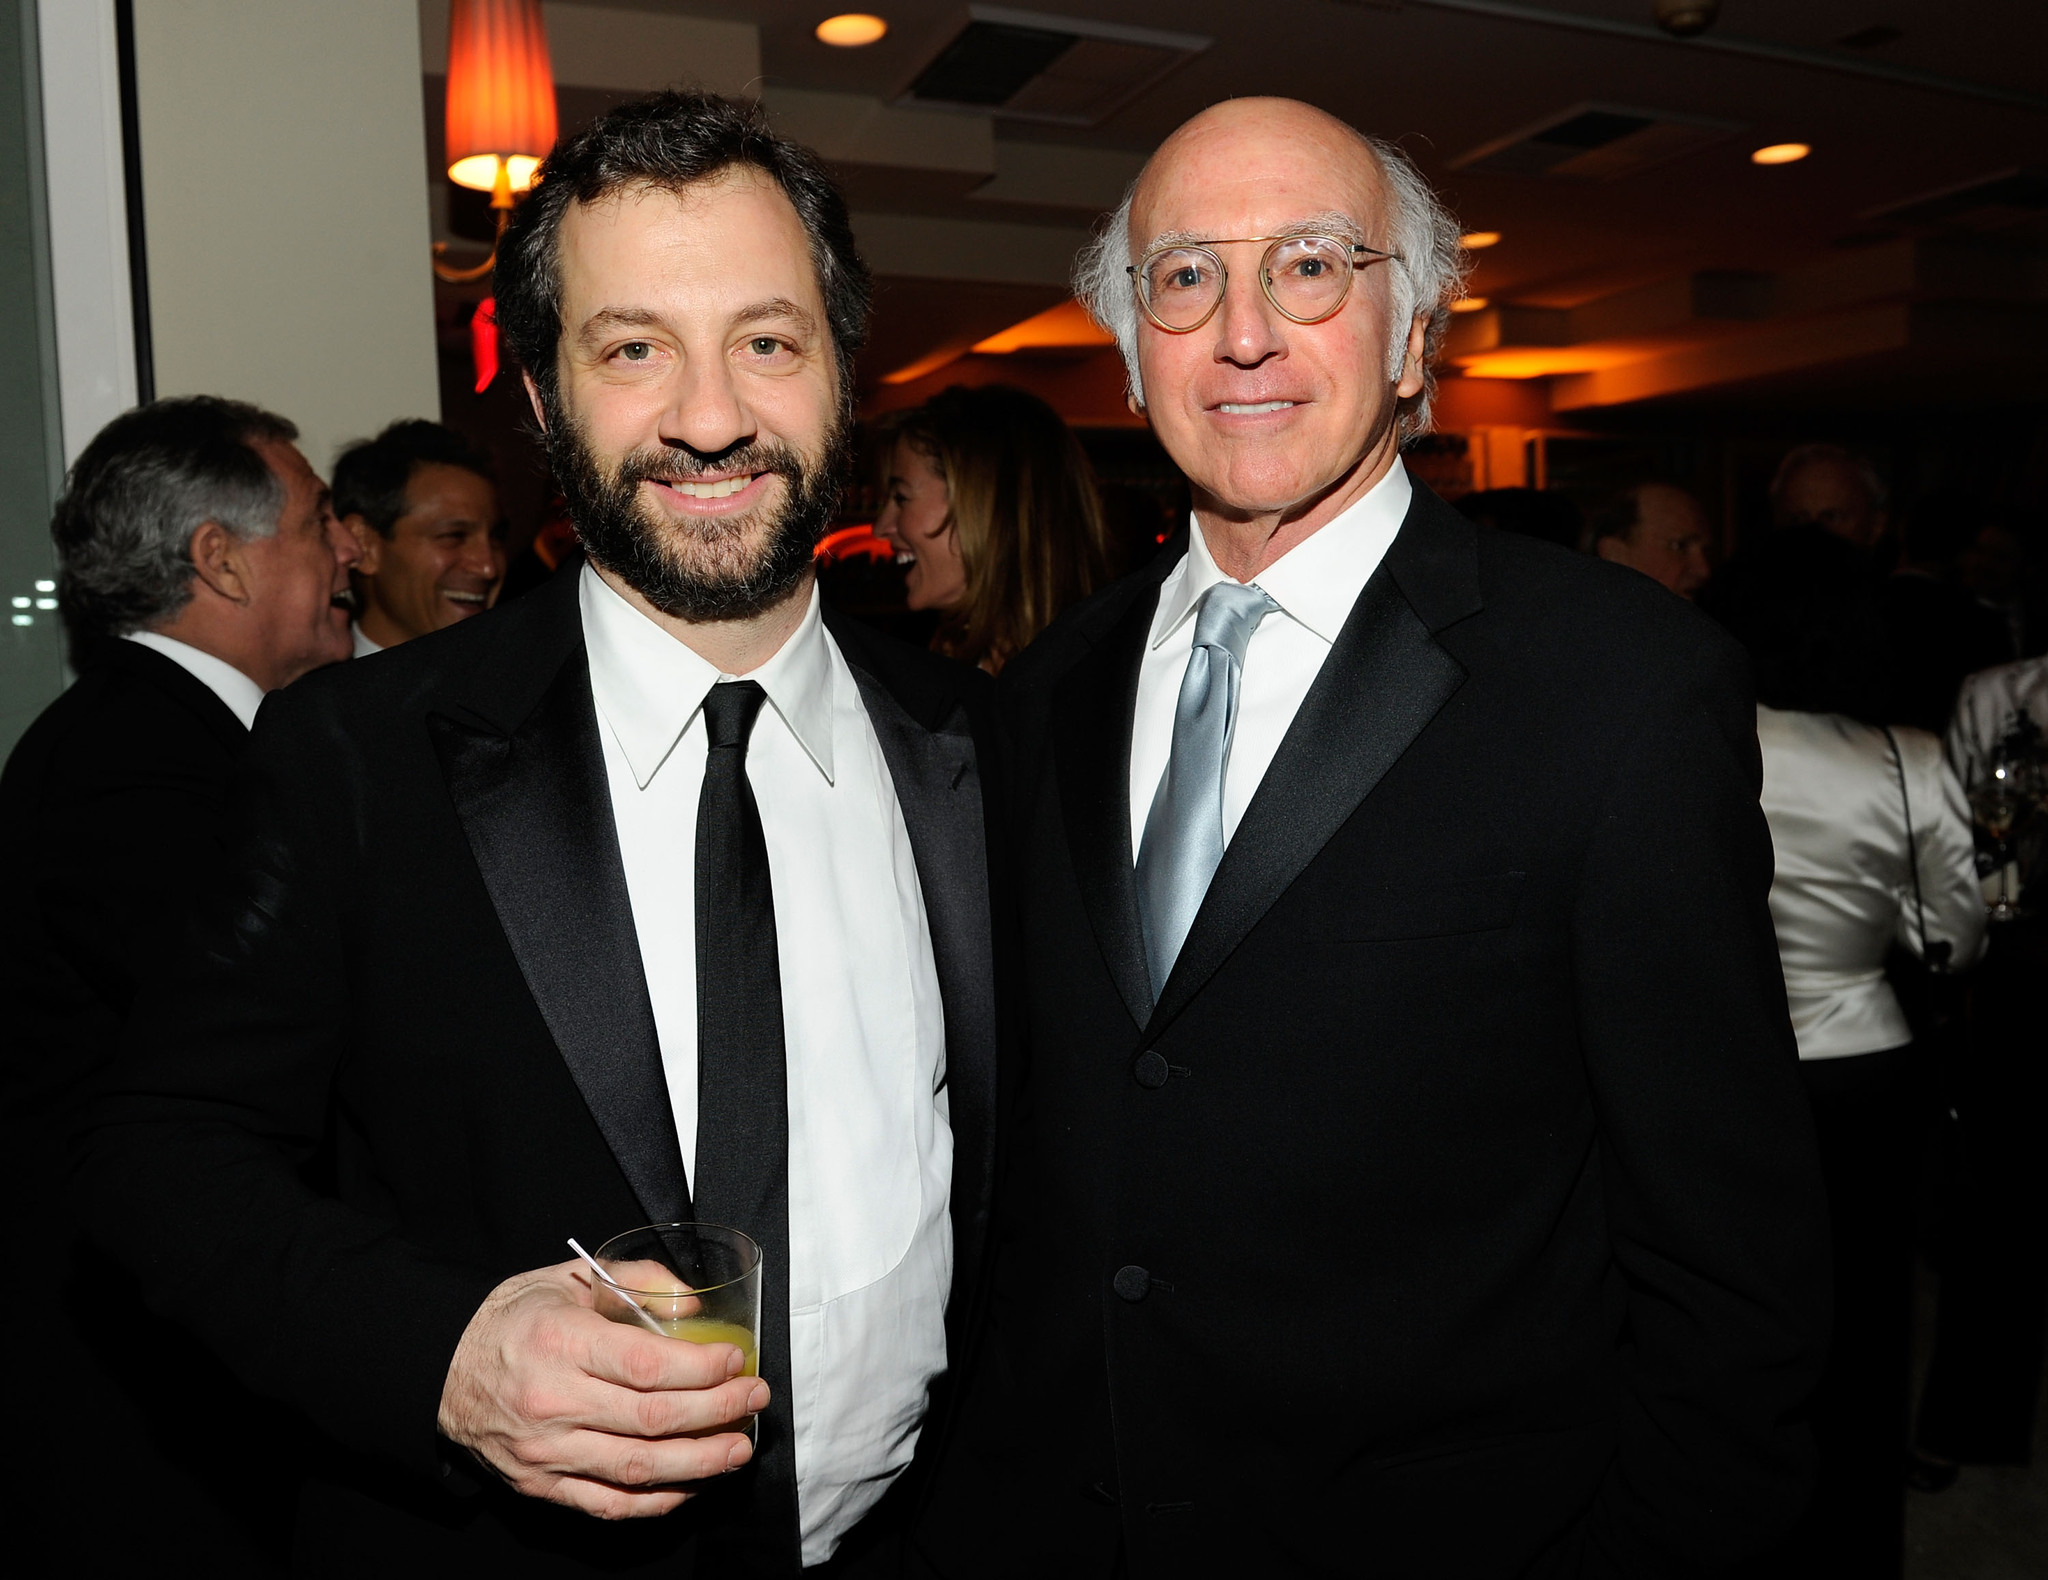 Judd Apatow and Larry David